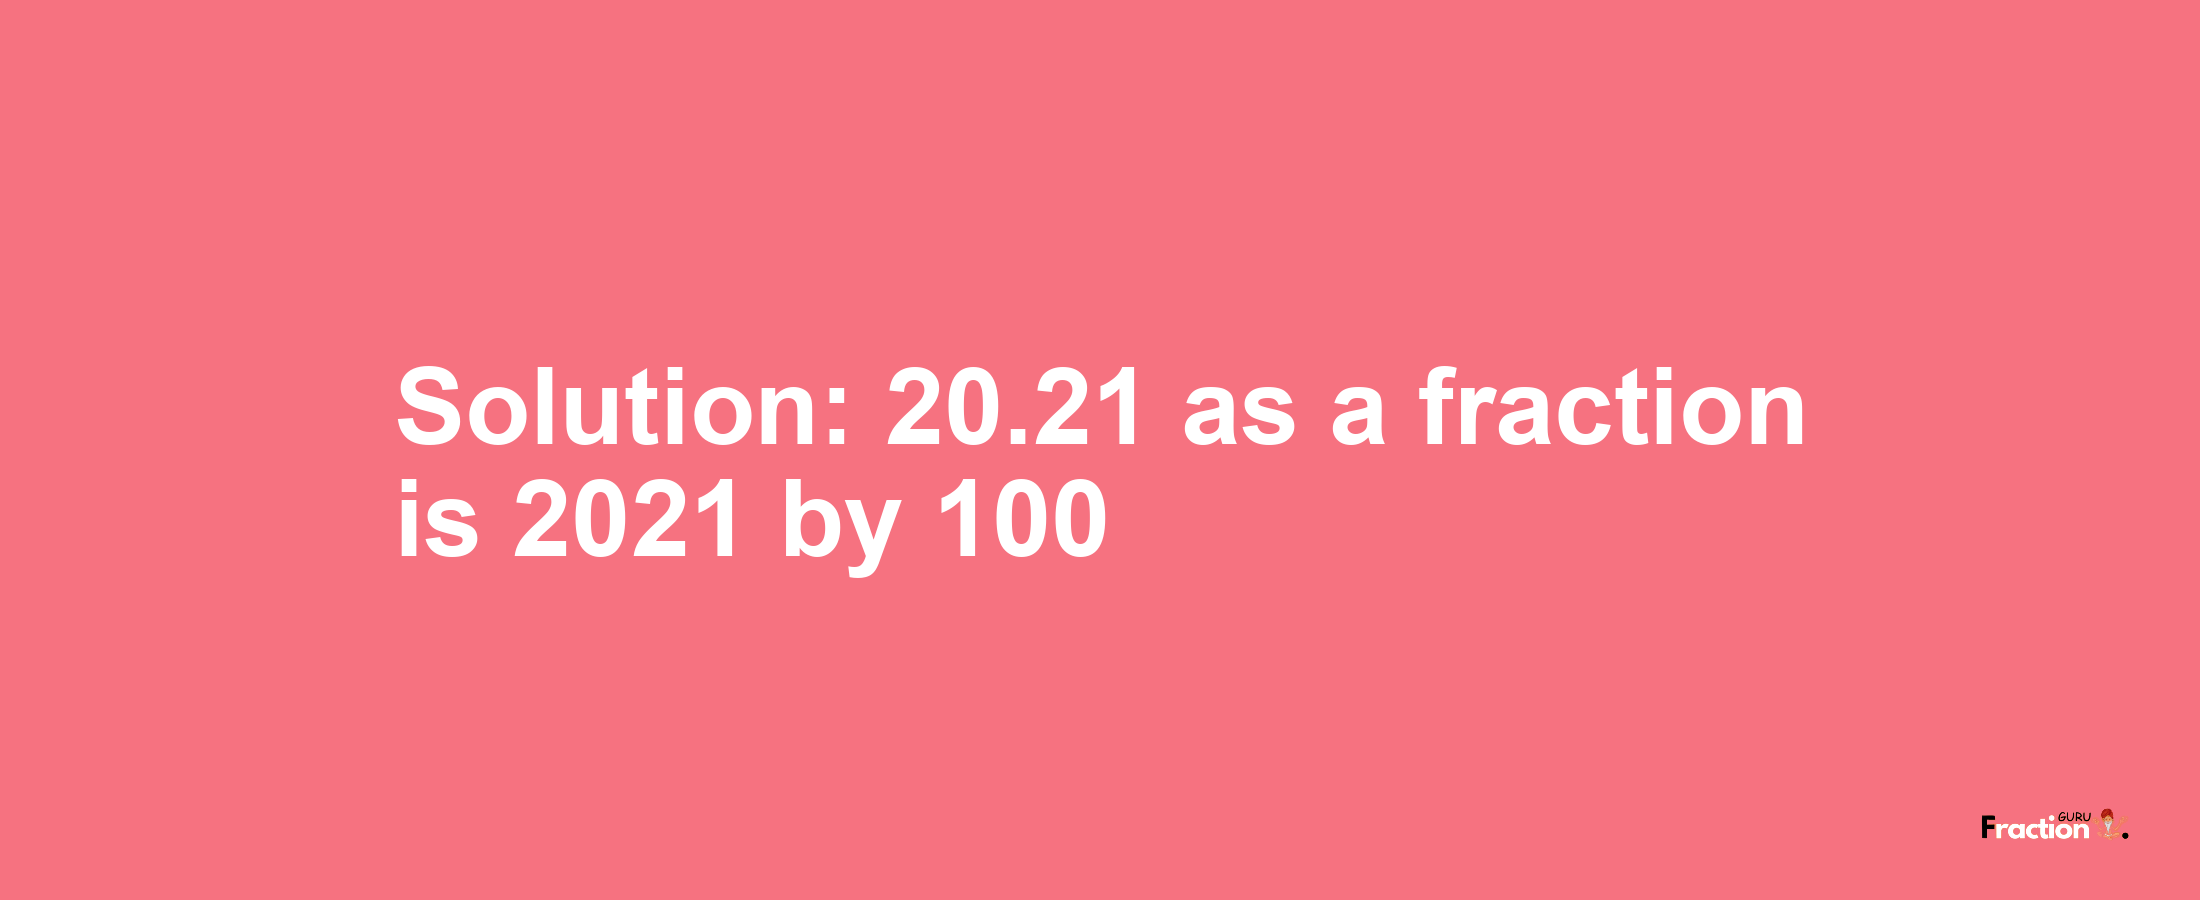 Solution:20.21 as a fraction is 2021/100